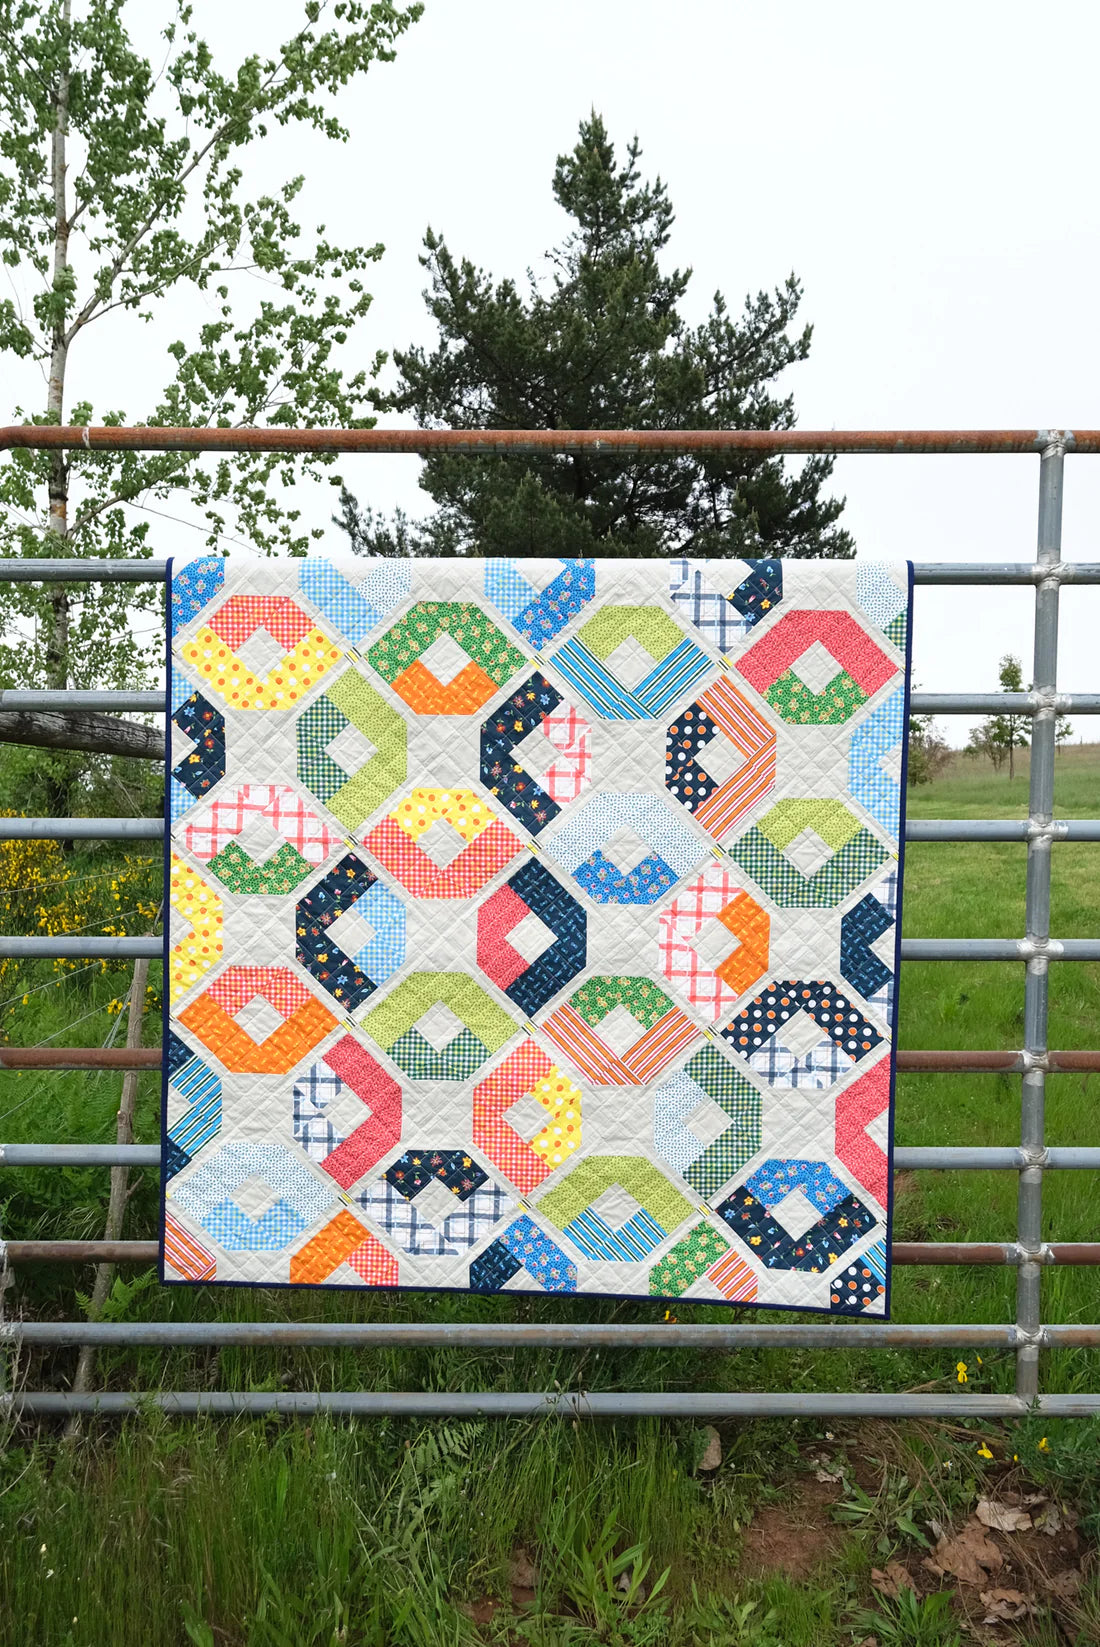 The Elena Quilt Pattern by Kitchen Table Quilting